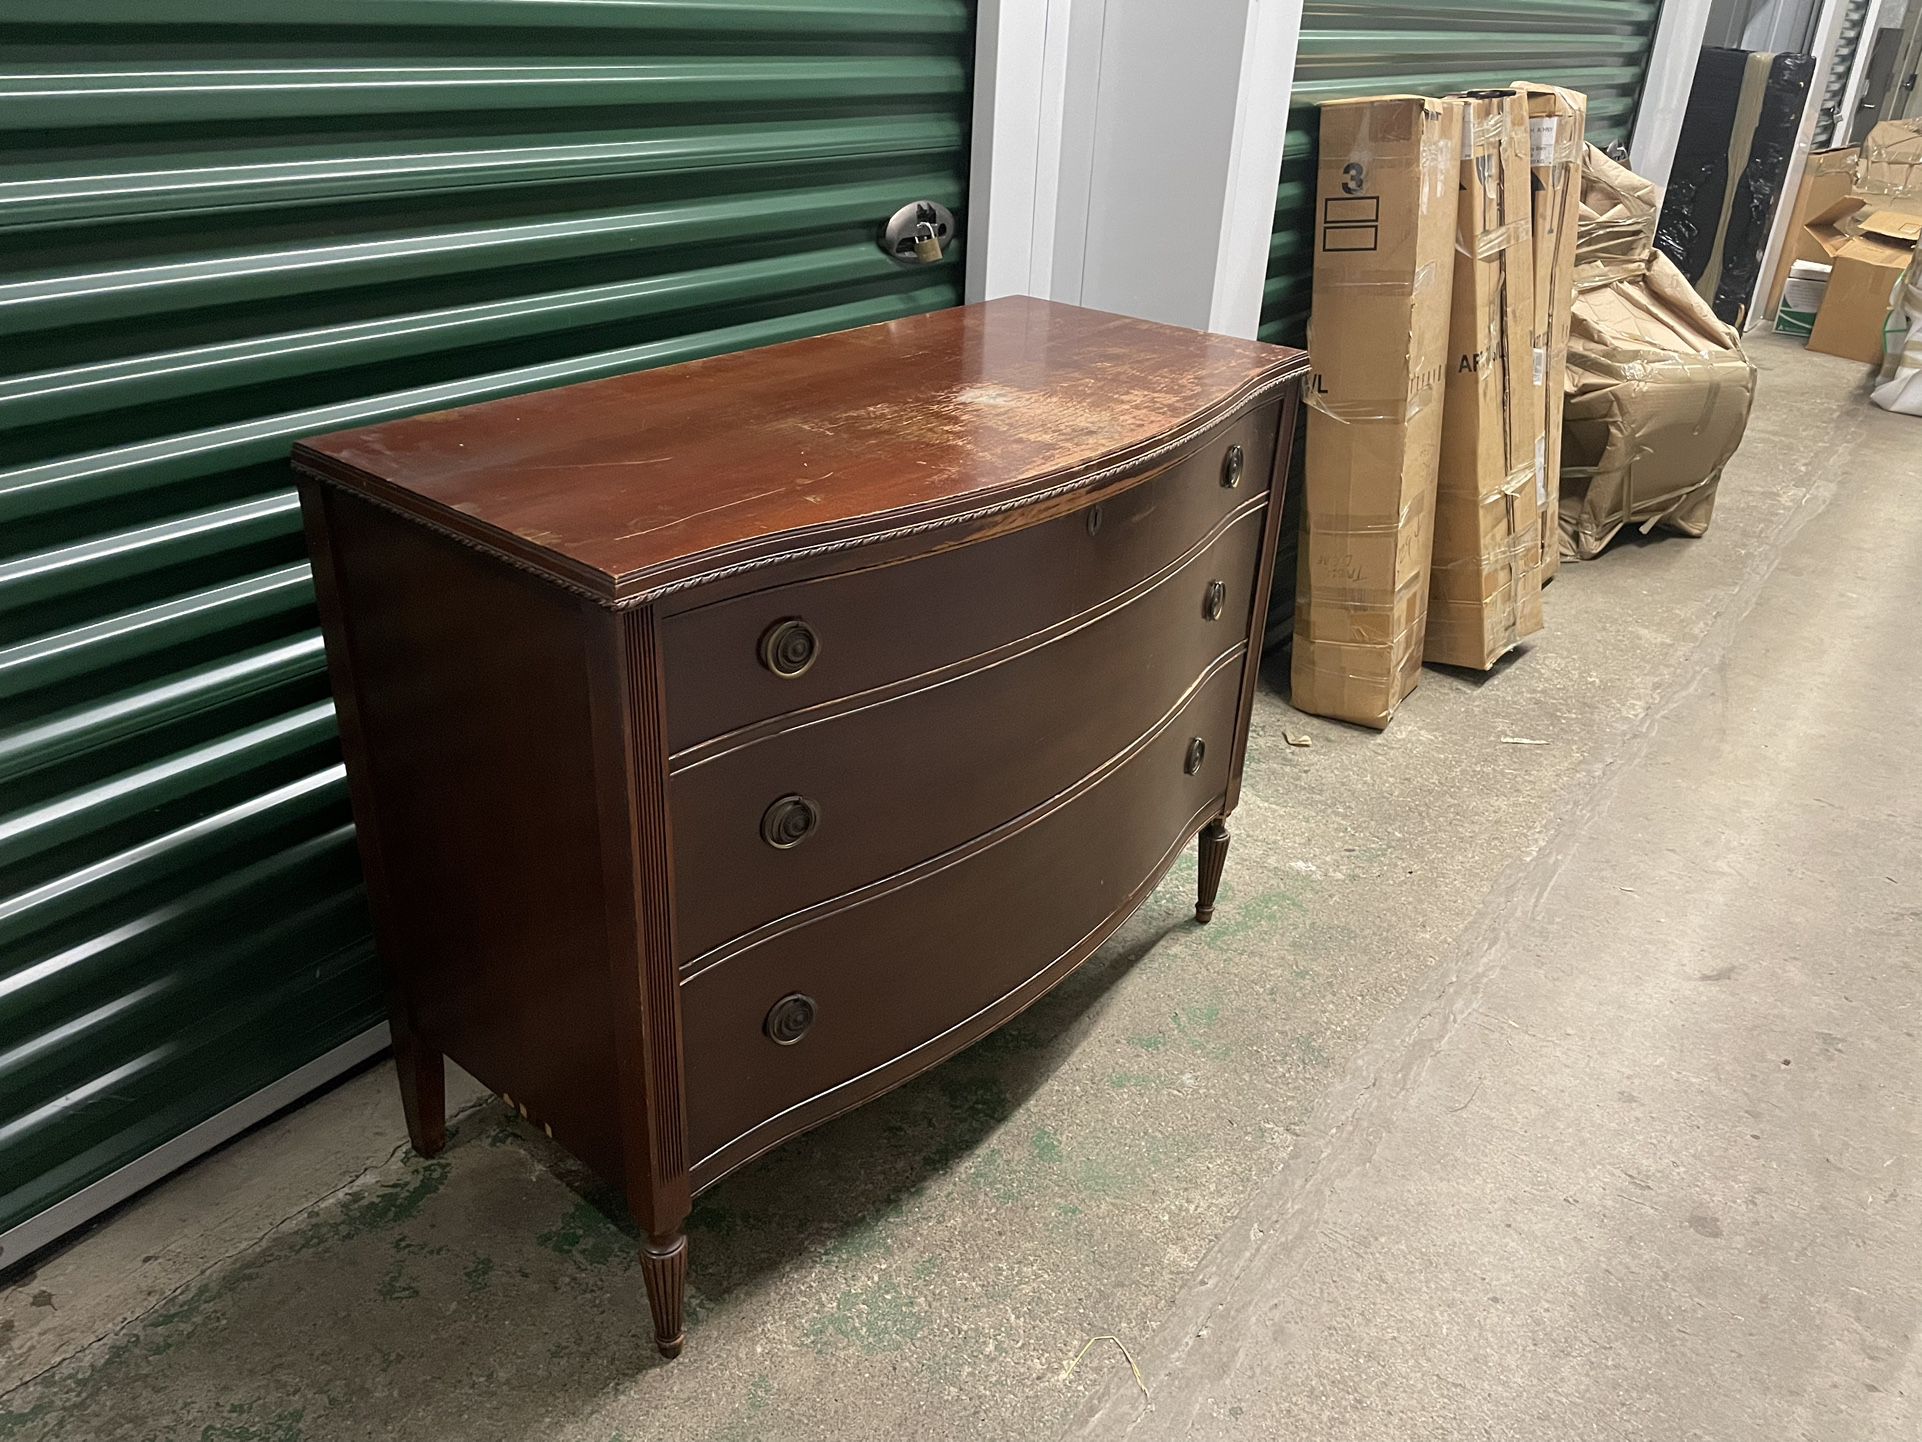 Two Antique Wood Dressers - $225